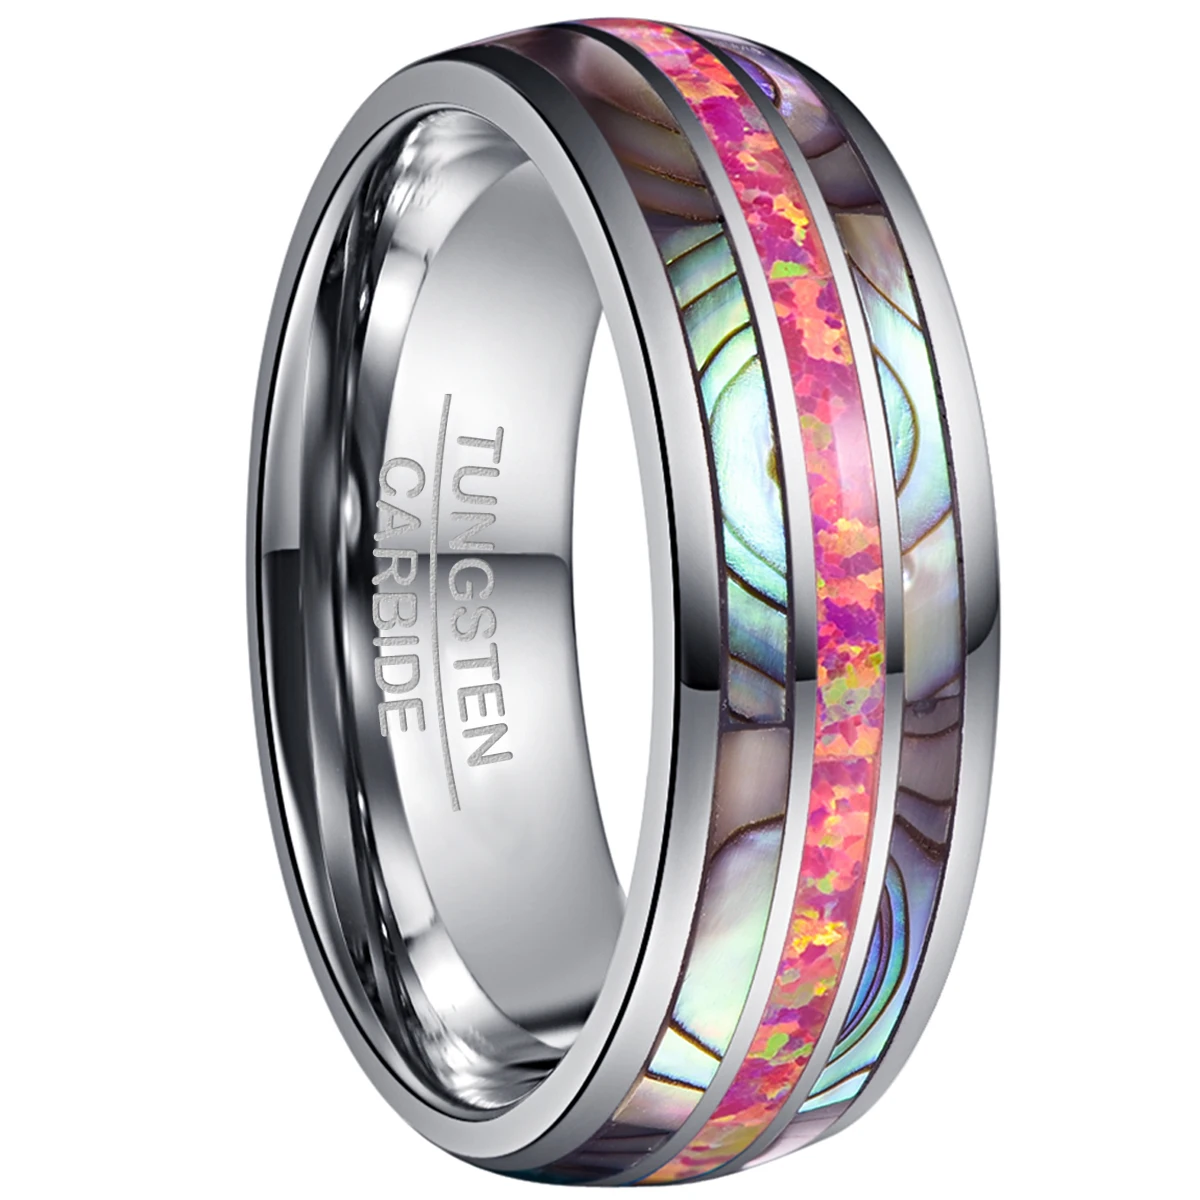 

BONLAVIE Tungsten Carbide Ring 8mm Dome Steel Inlaid with Two Abalone Shells + Deep Magenta Opal Tungsten Steel Ring Comfort Fit